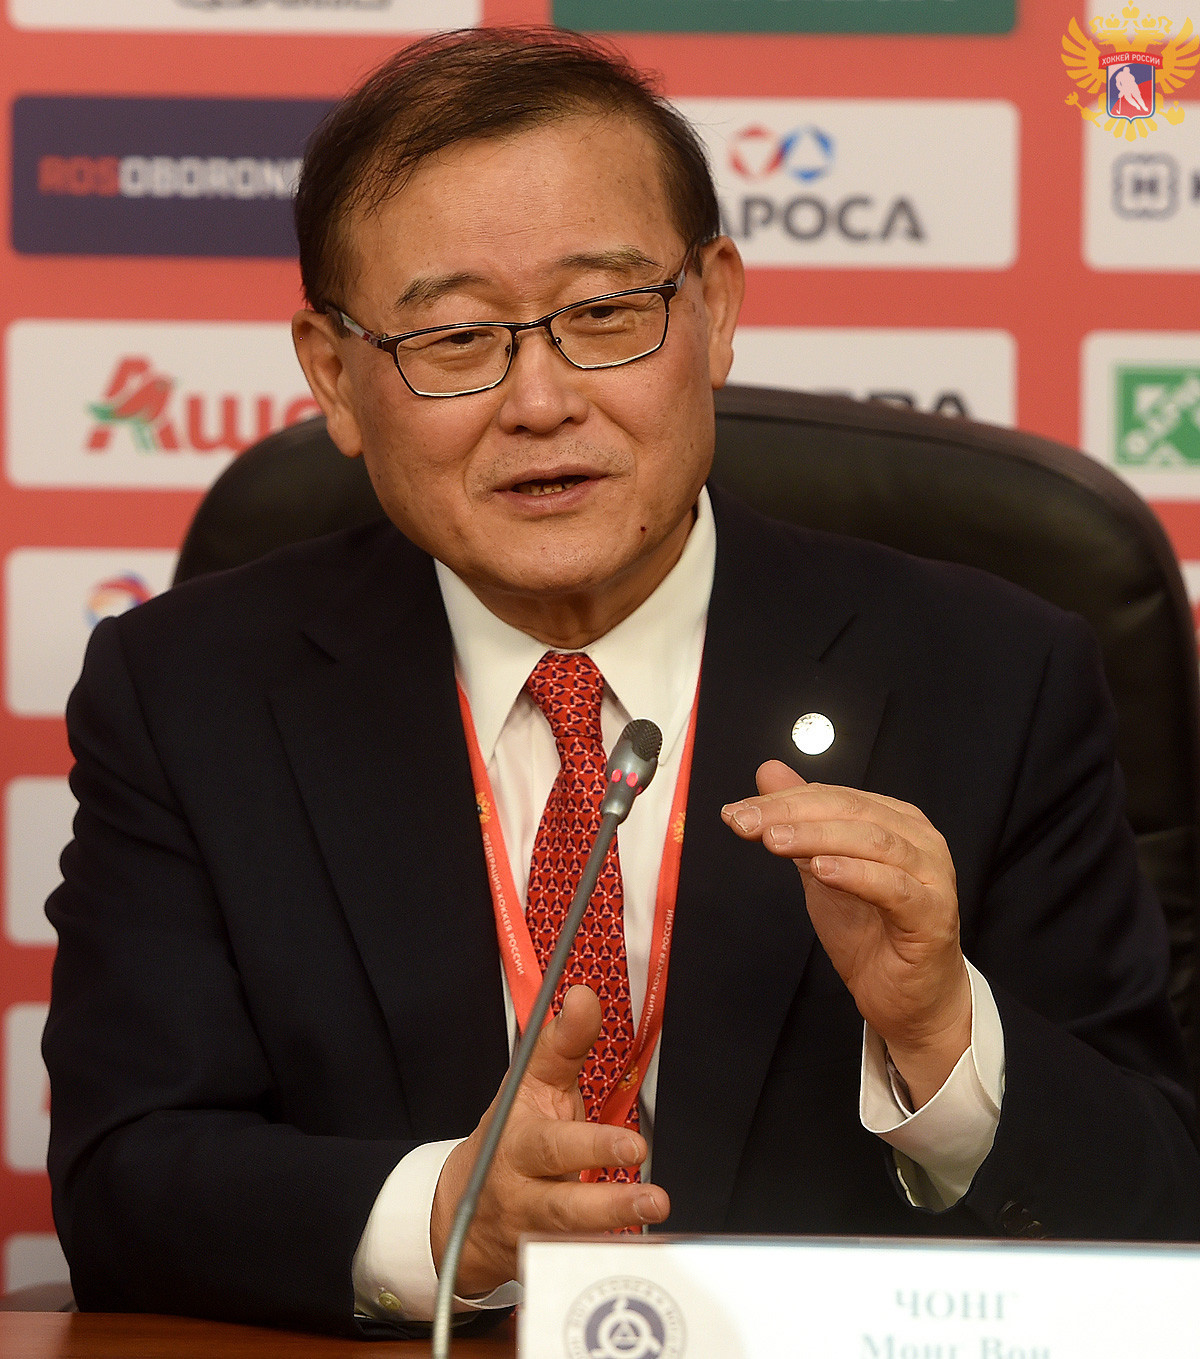 Despite Russia's ban from Pyeongchang 2018, KIHA President Chung Mong-won said the agreement will help Russia's preparations for the Games ©Russian Ice Hockey Federation